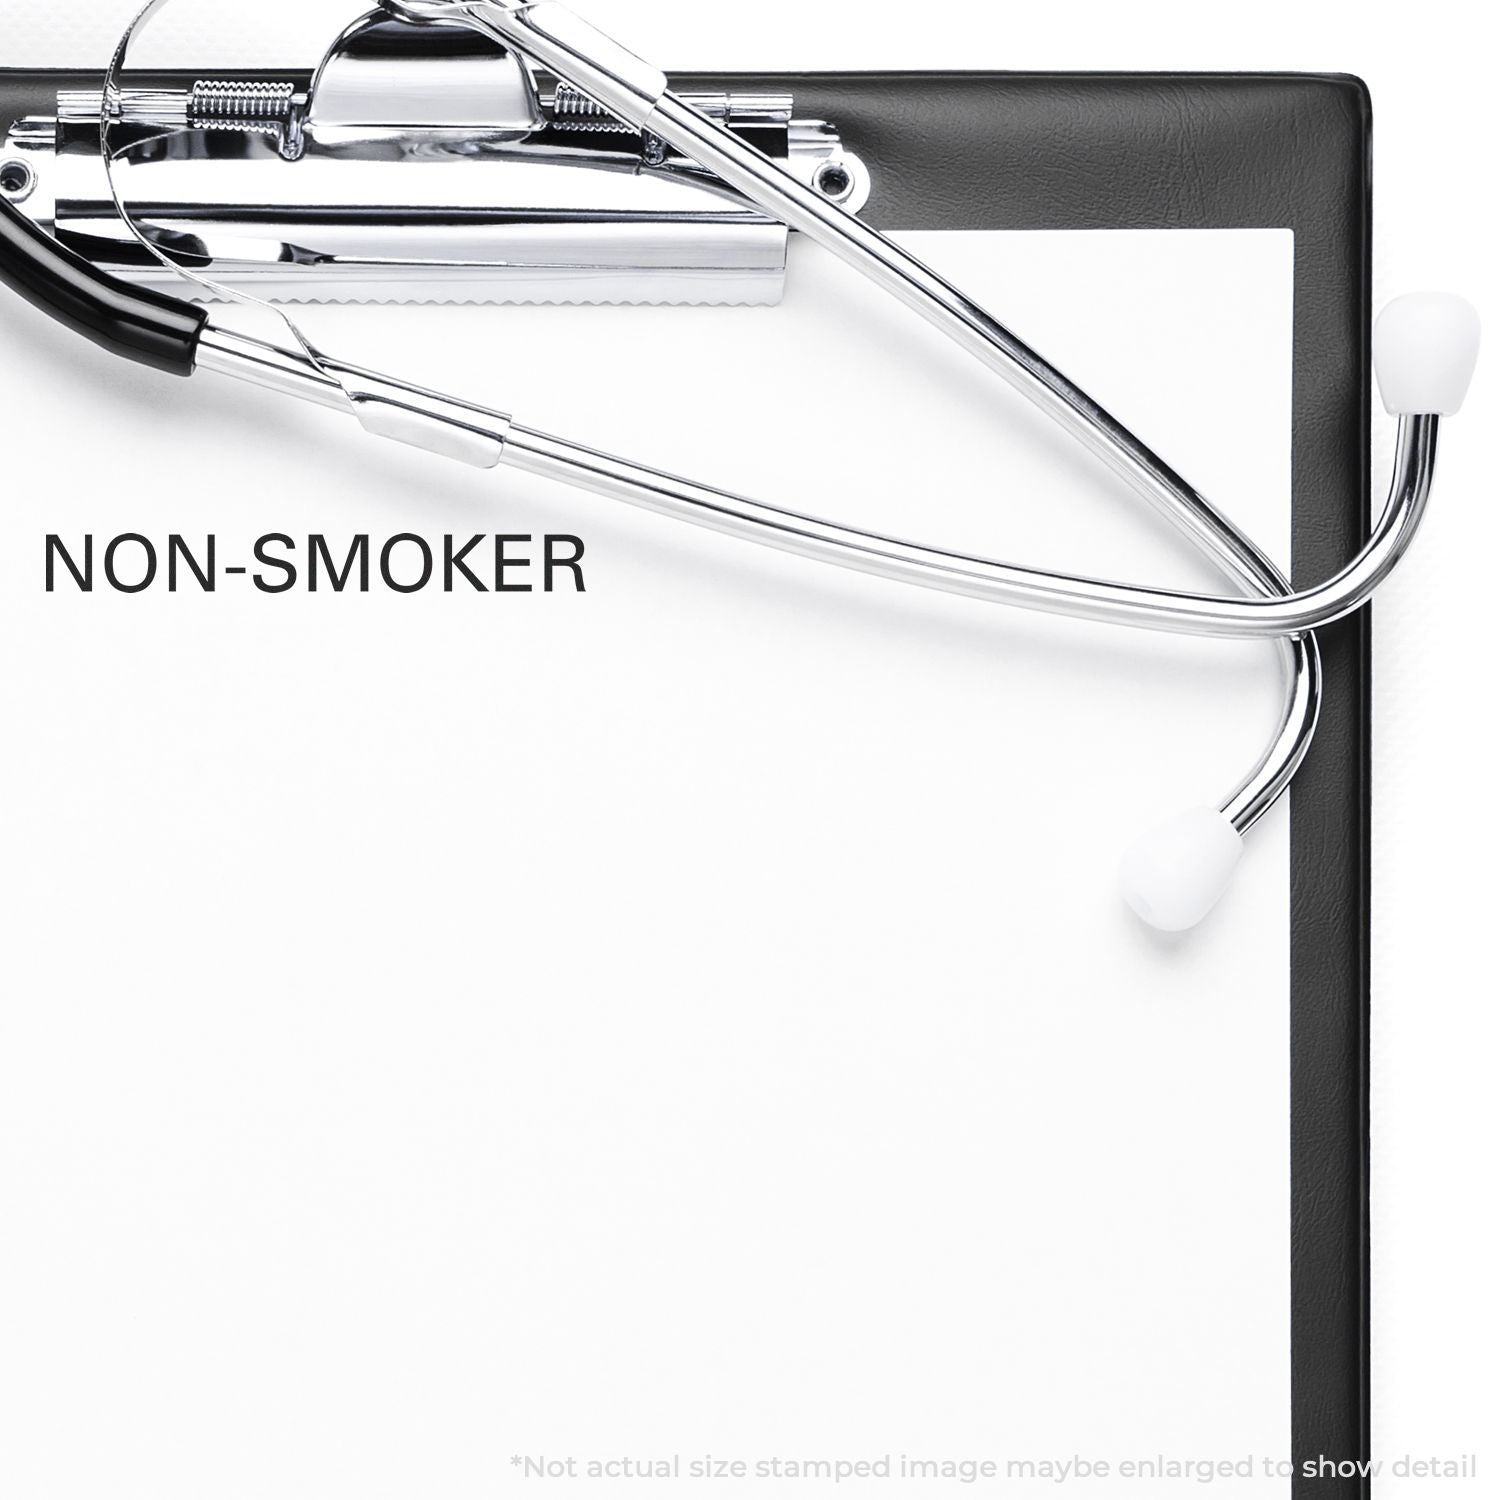 A self-inking stamp with a stamped image showing how the text "NON-SMOKER" is displayed after stamping.